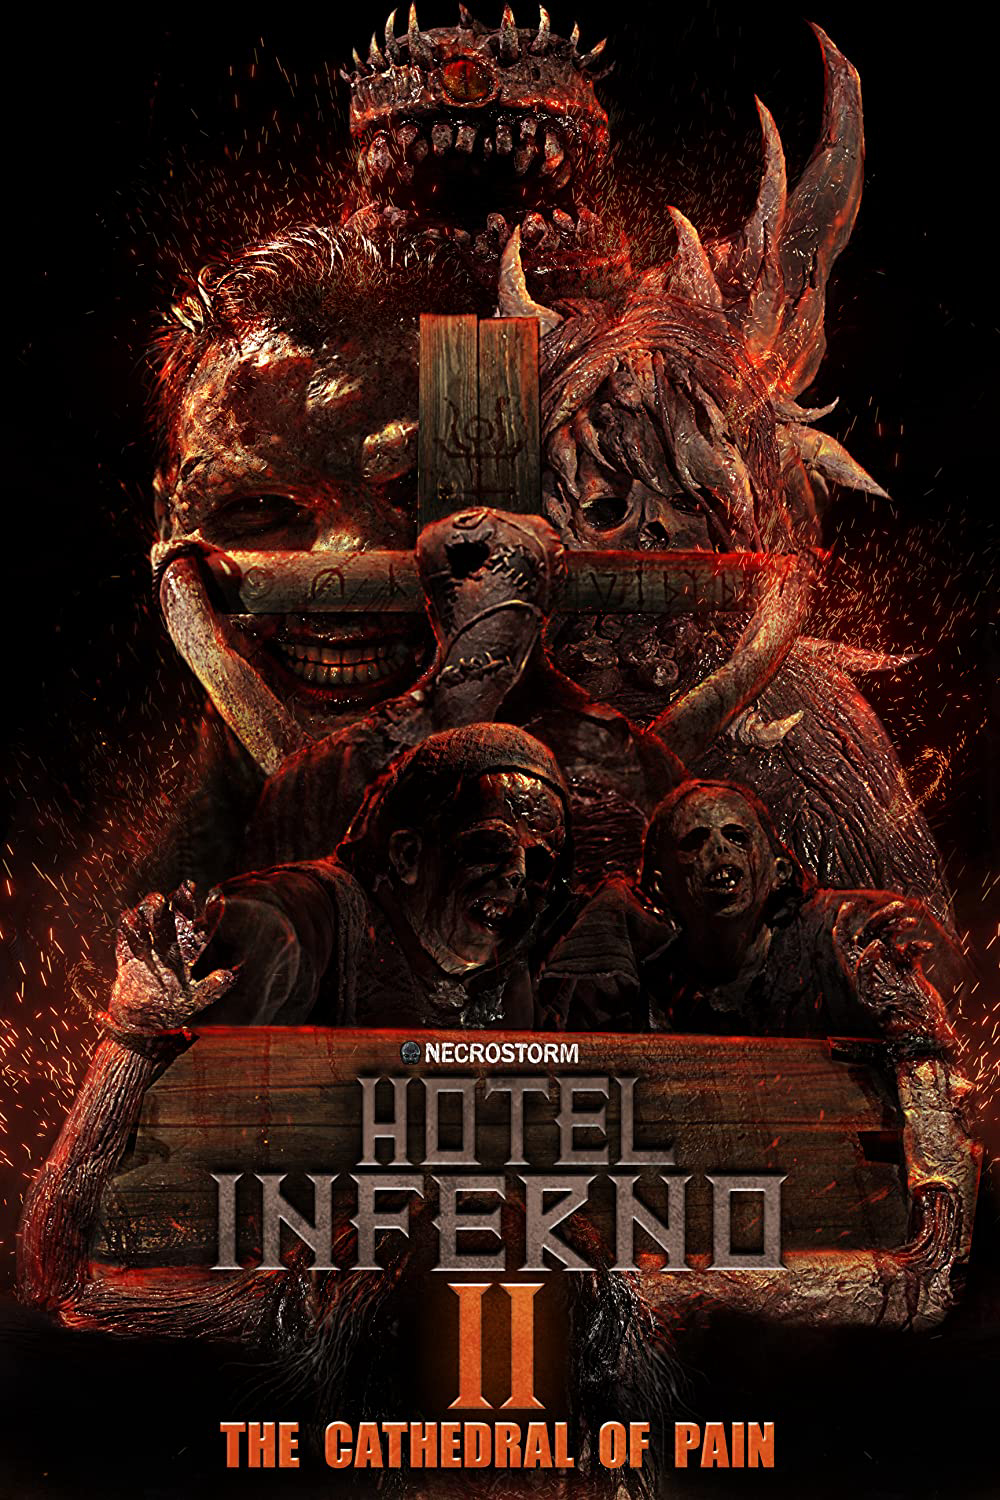 Poster Phim Hotel Inferno 2: The Cathedral of Pain (Hotel Inferno 2: The Cathedral of Pain)